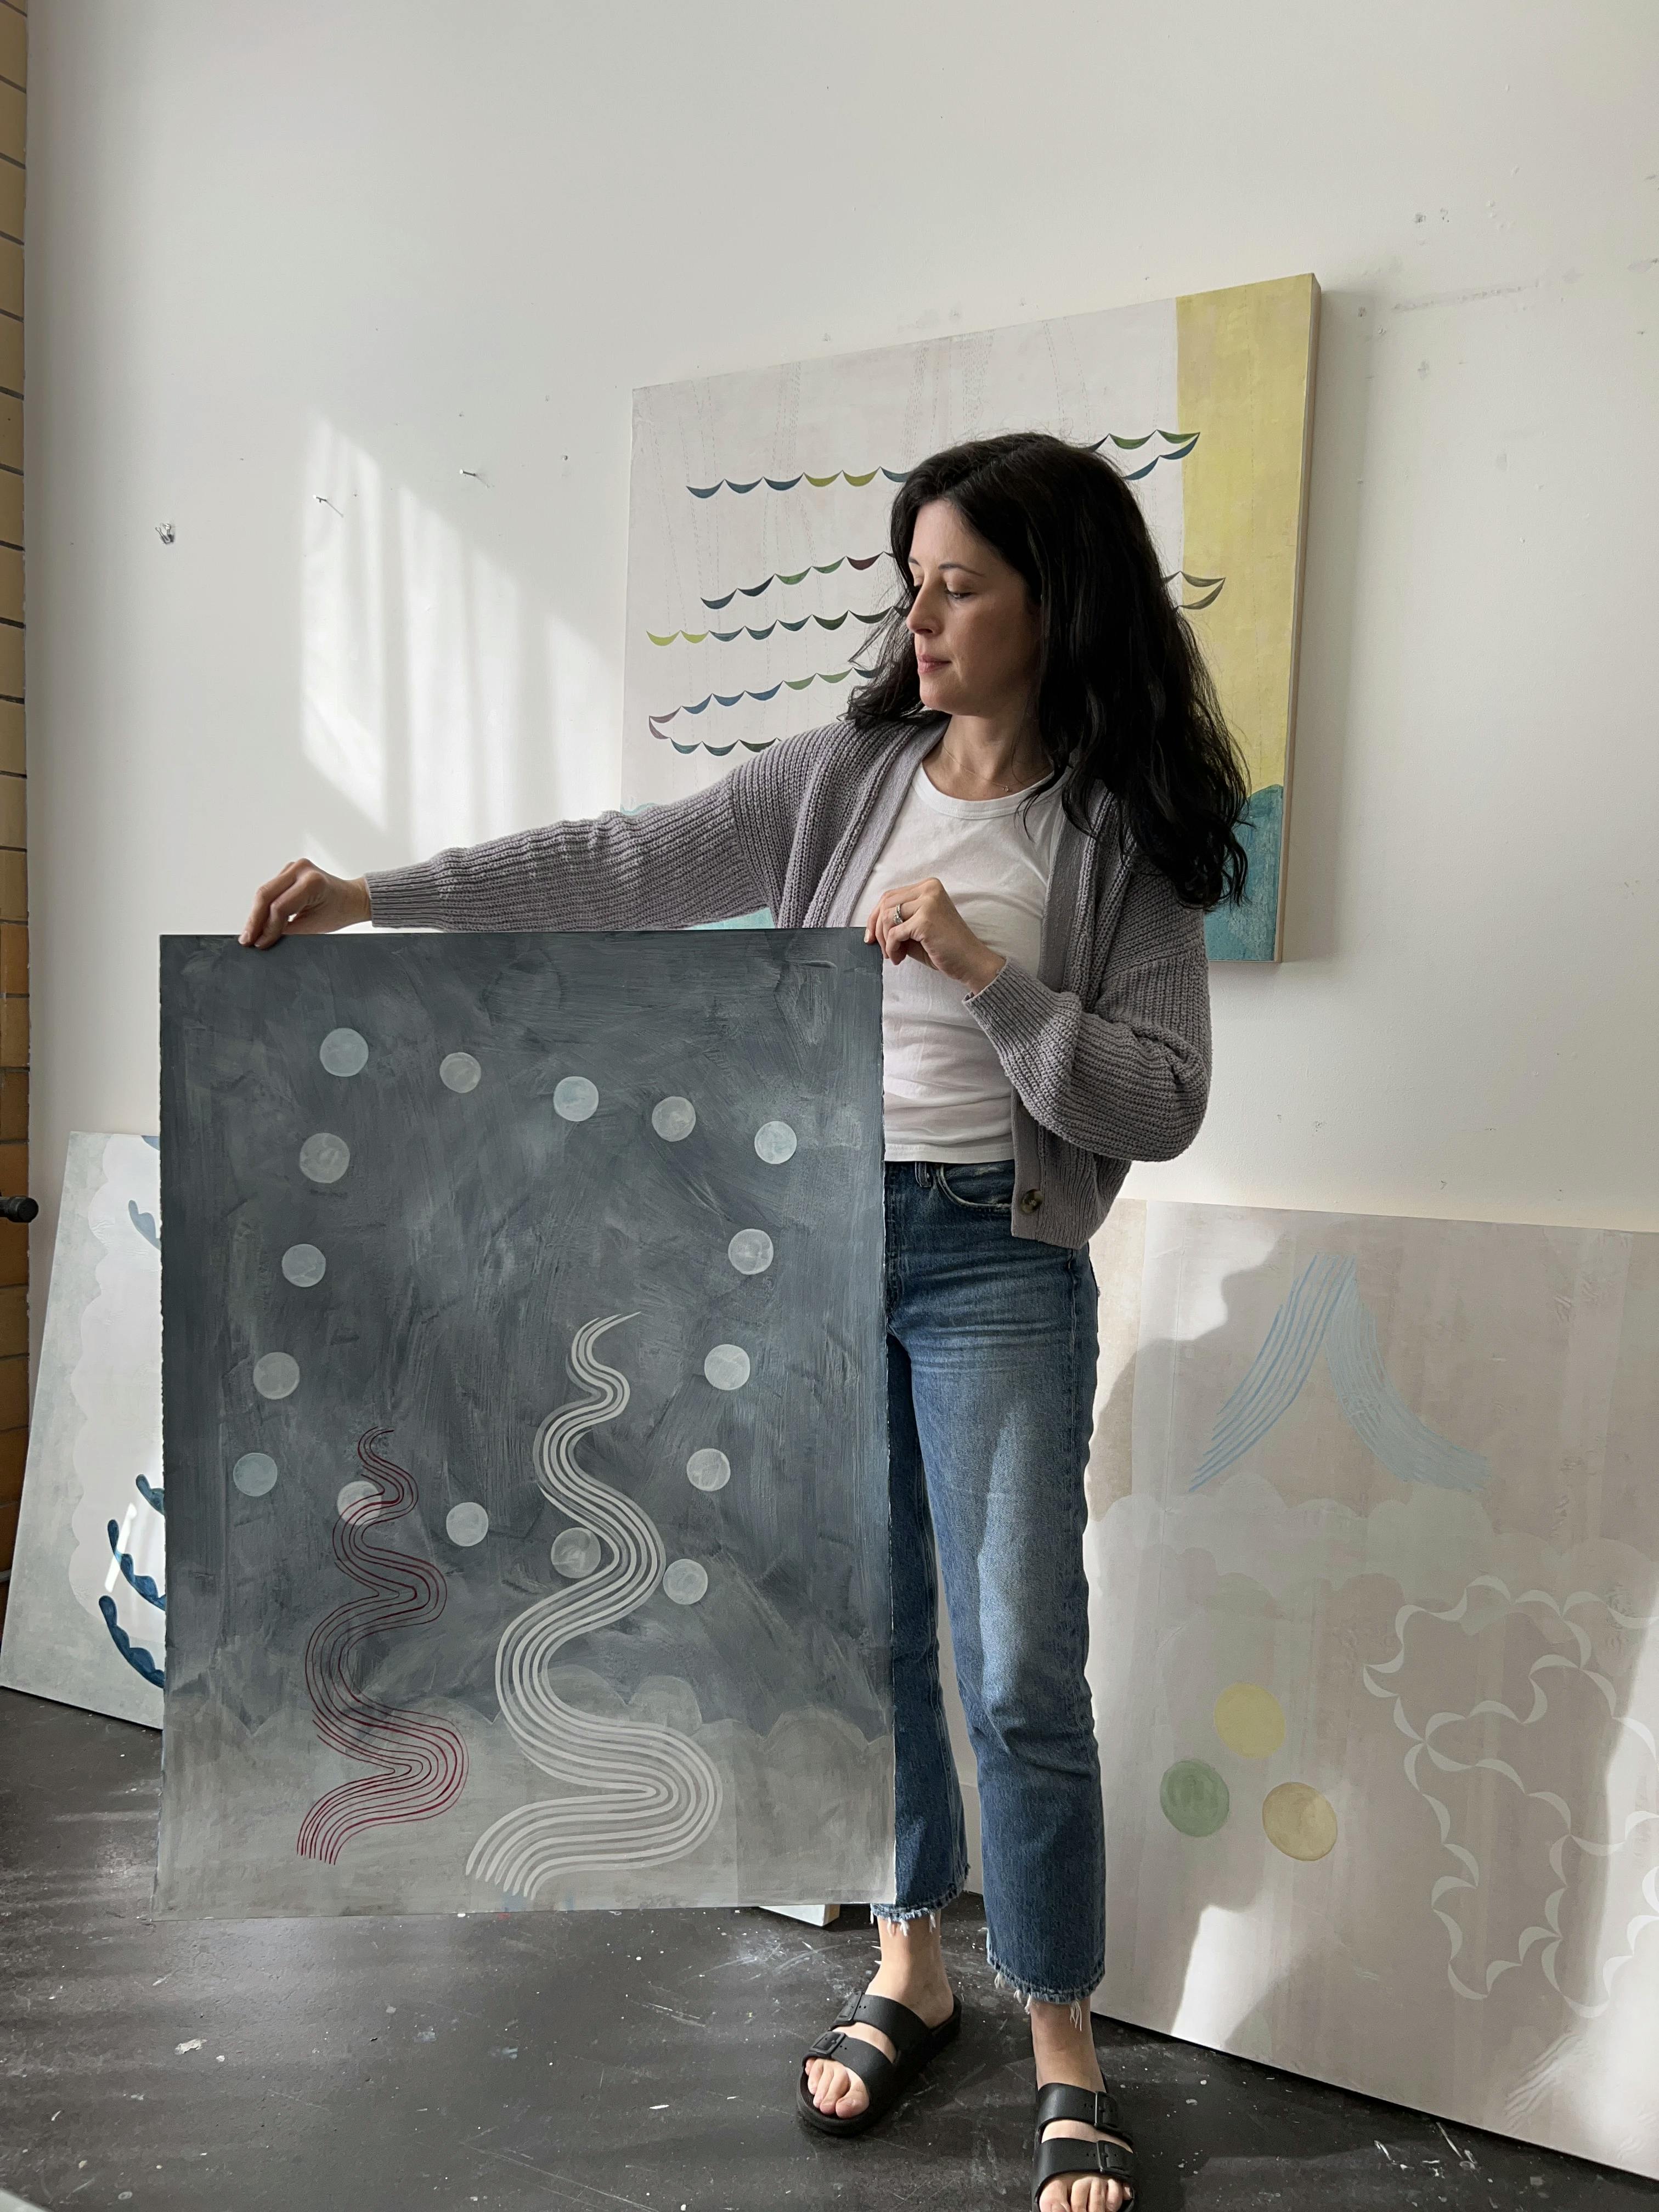 Artist Lydia Bassis holding a light gray abstract painting on paper in her studio.